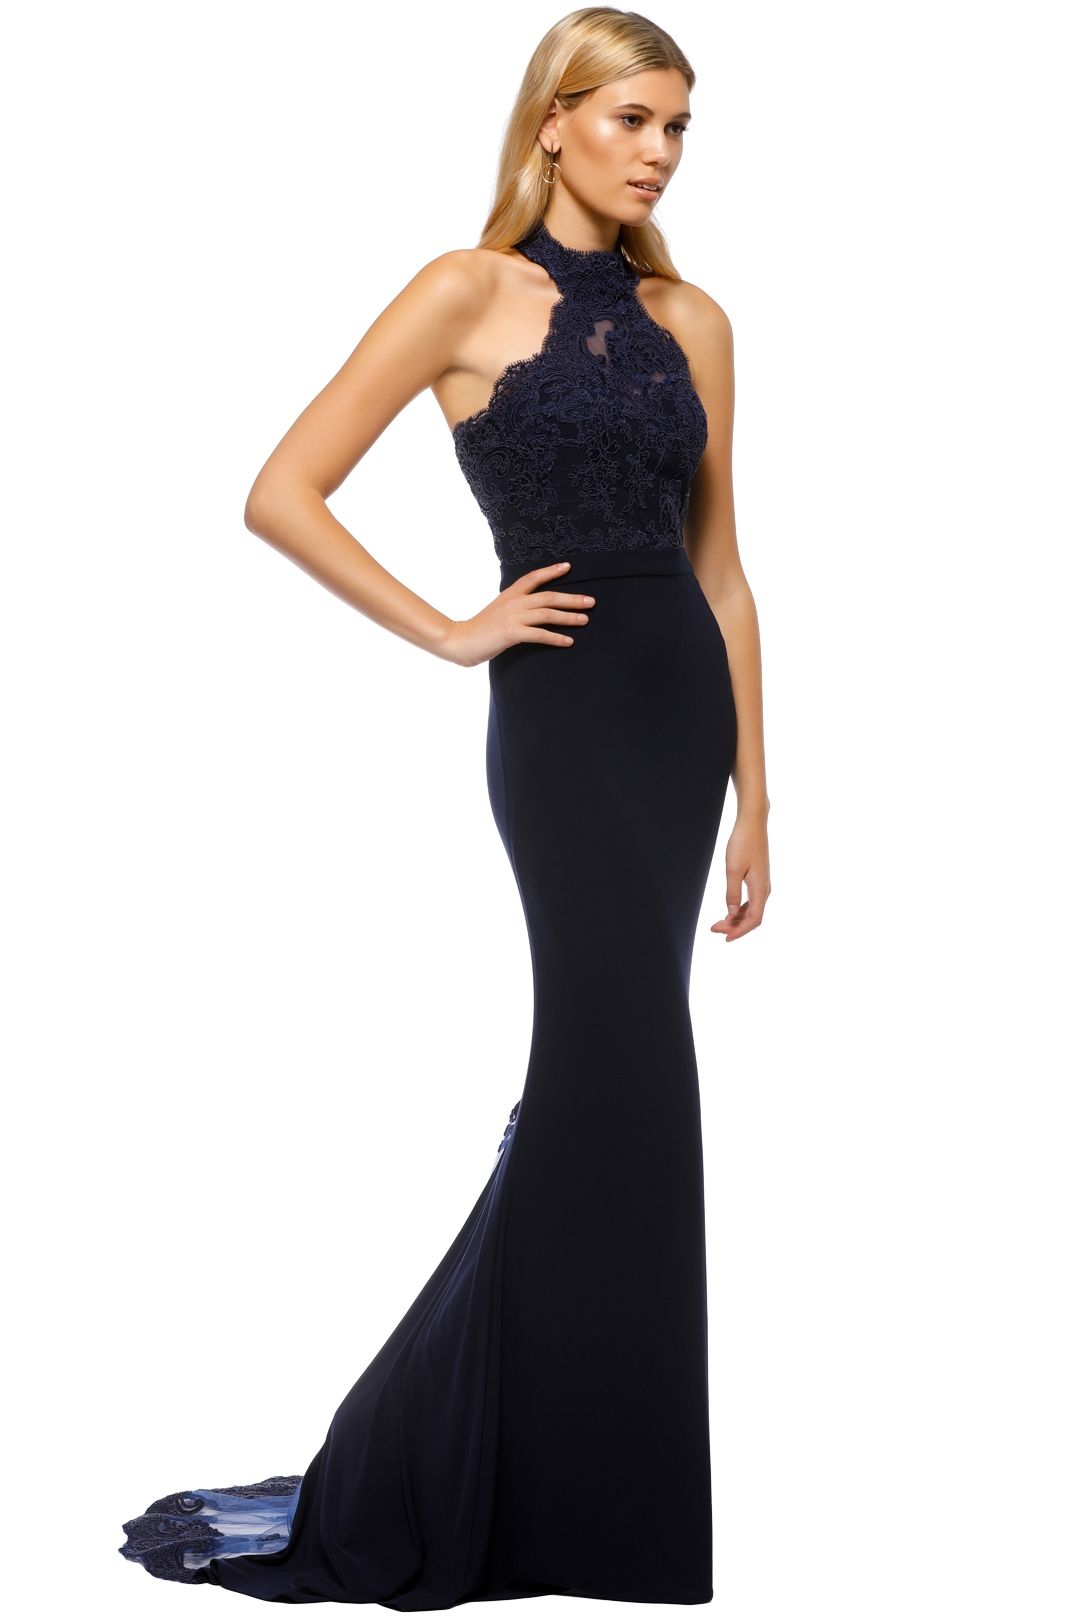 Tinaholy - Lana High Neck Gown - Navy - Side